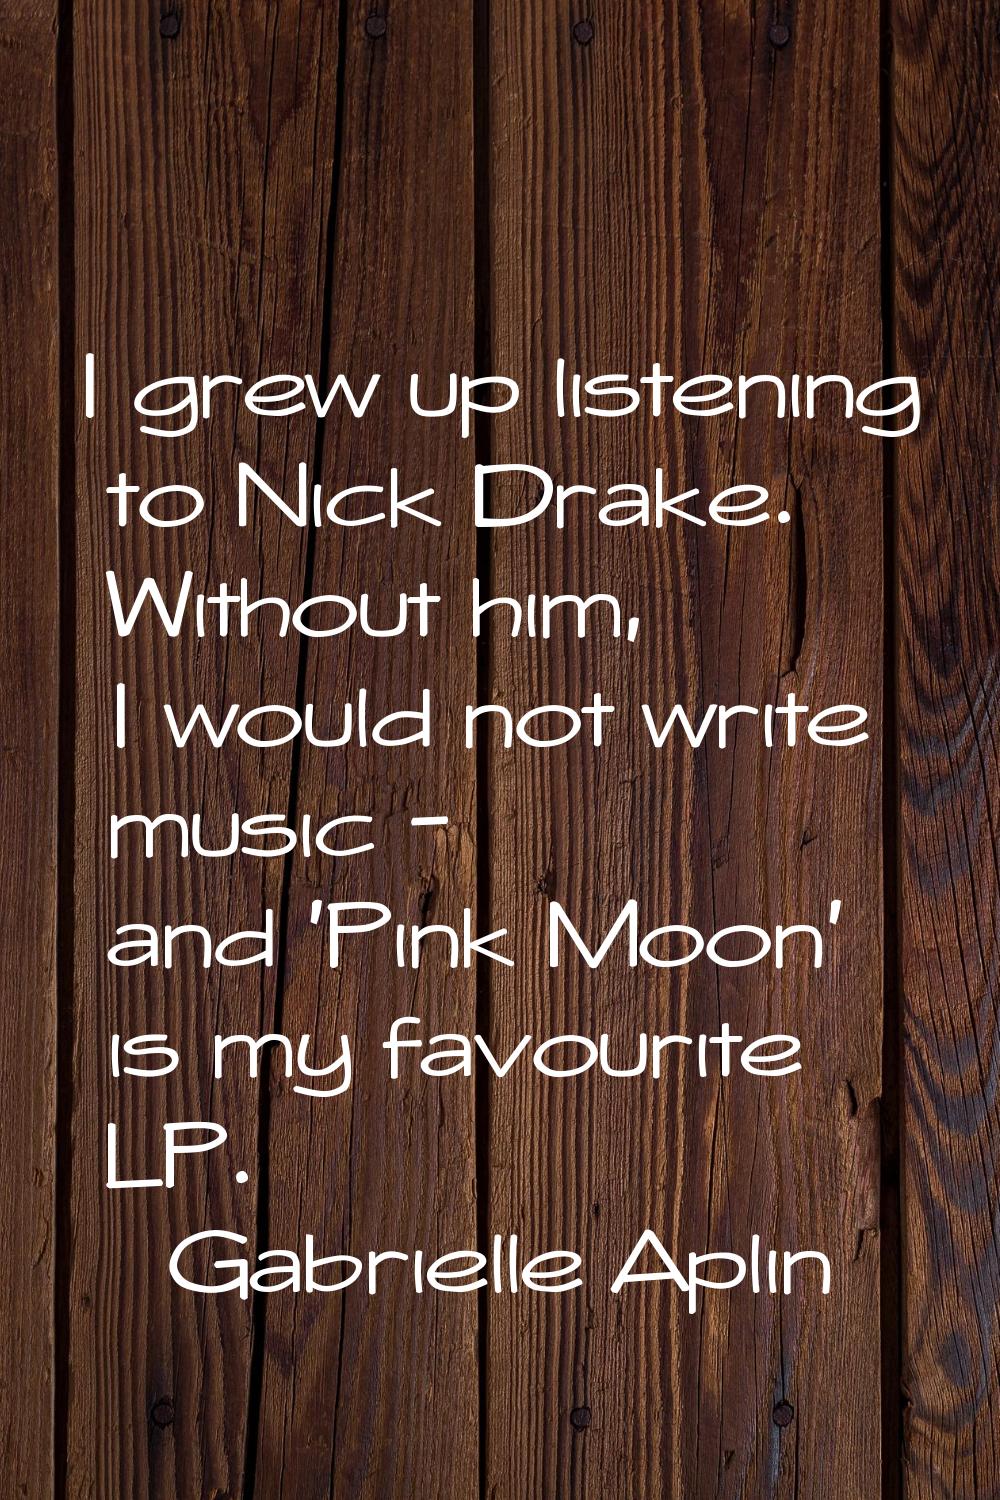 I grew up listening to Nick Drake. Without him, I would not write music - and 'Pink Moon' is my fav